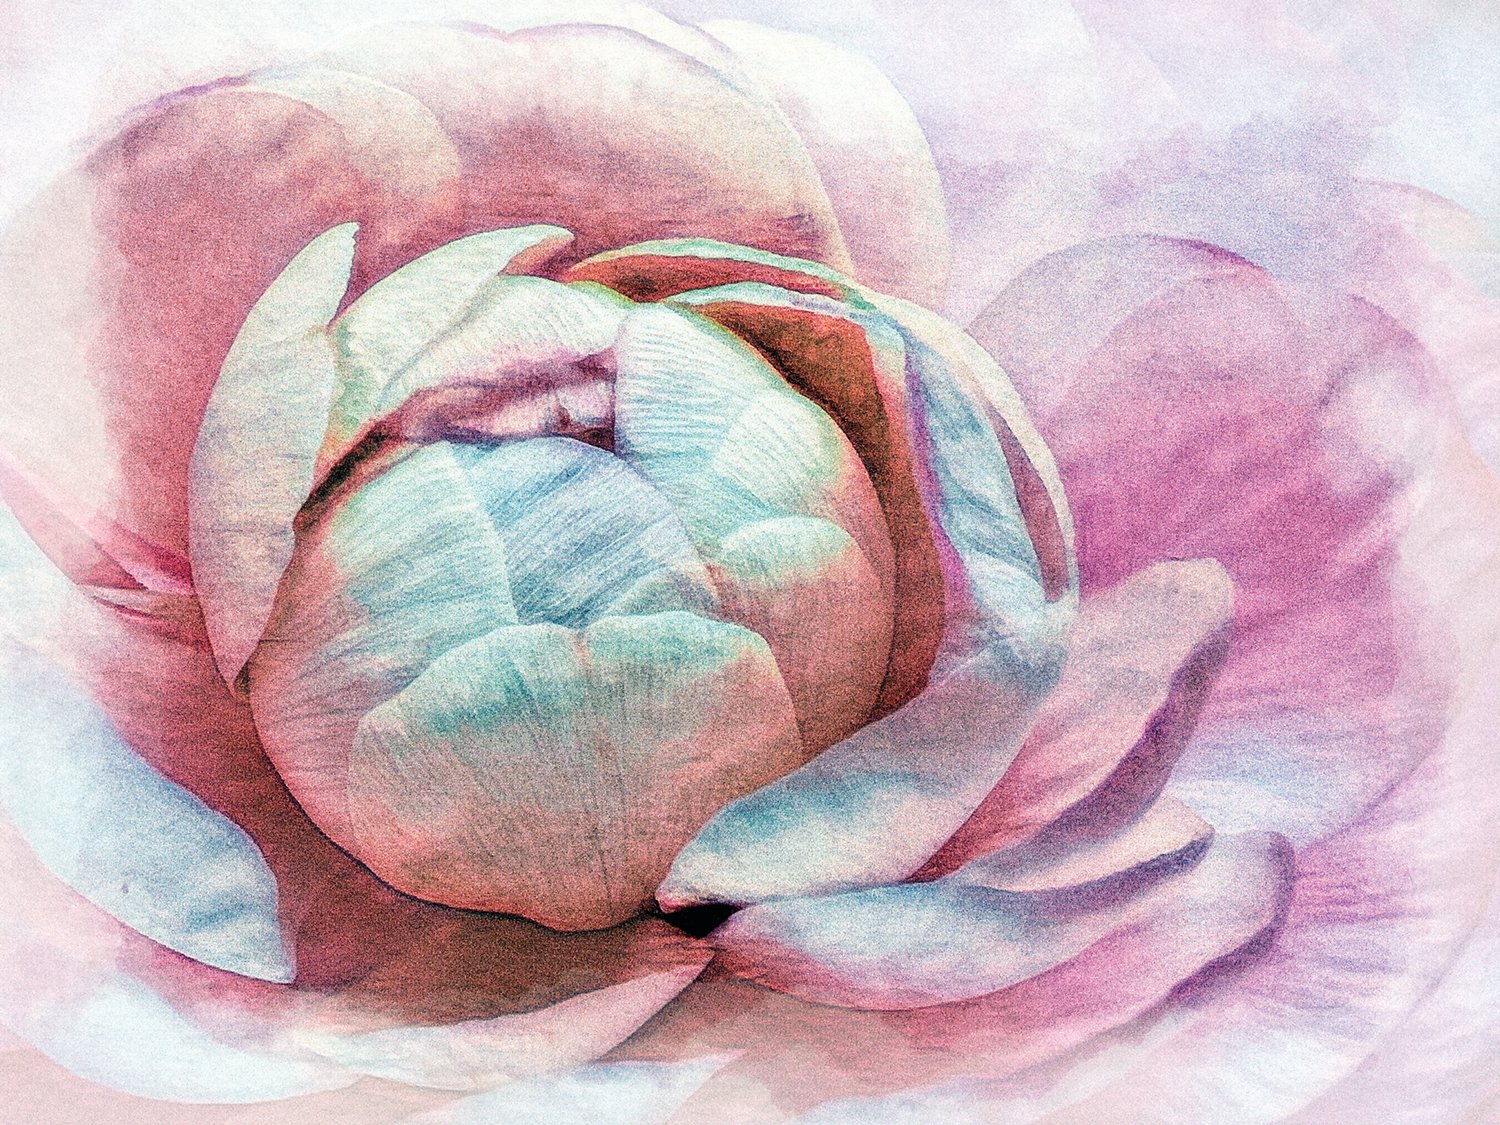 “Dahlia” by Martin Schwartz is a photograph given a more painterly appearance.